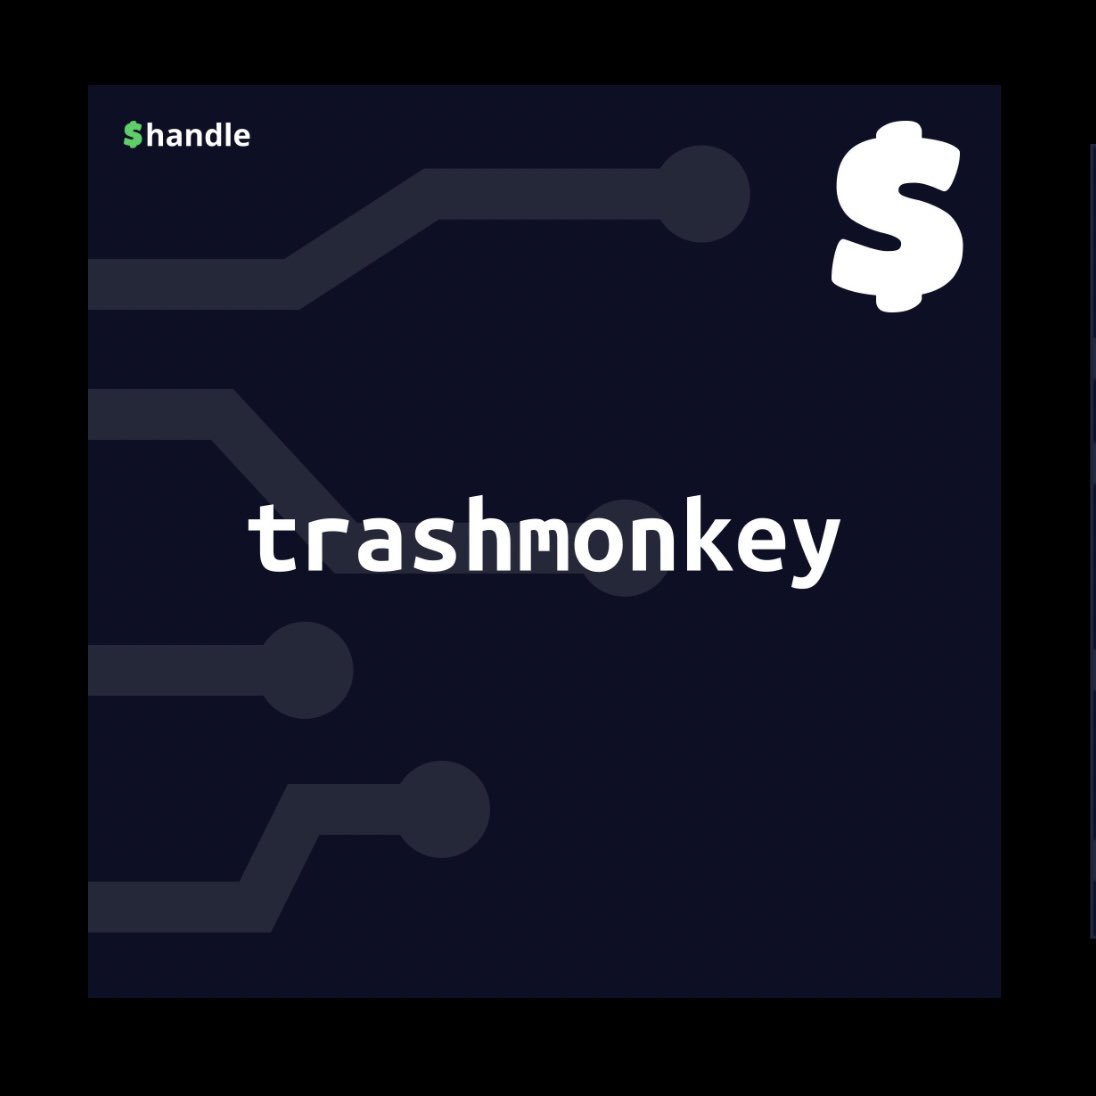 🦧Drop your handle or address below
Follow @BenRyanMe and retweet. 

I will choose one person at random to send the handle $trashmonkey to, to mark the occasion of TAS leaving #Cardano 🎉

You have 48 hours 

#TheApeSociety @the_ape_society $Levvy $SOC #NFTCommuntiy #CardanoNFT…